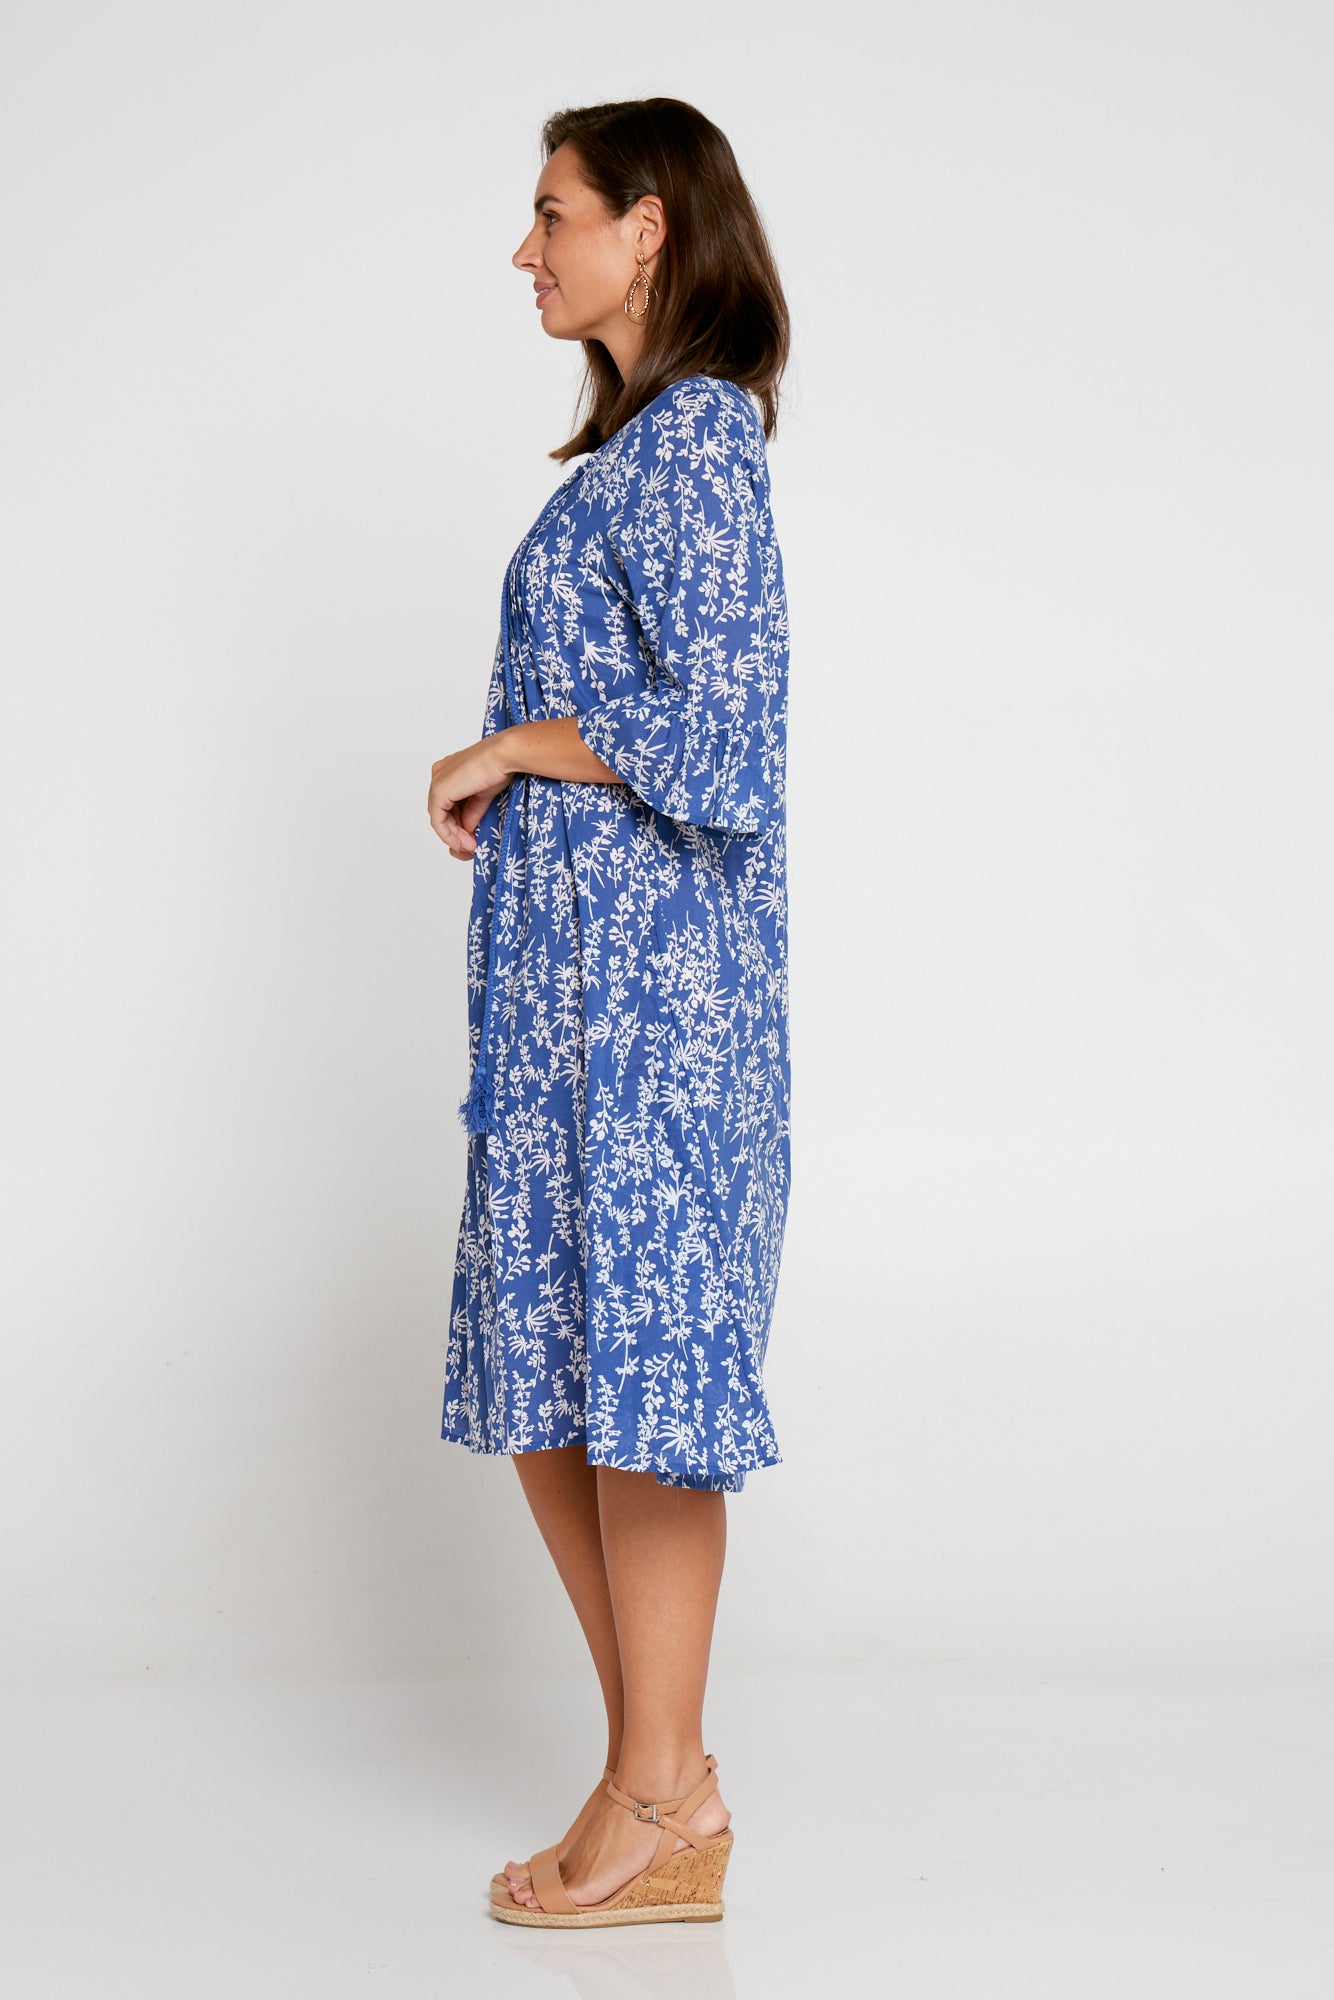 Bethany Cotton Dress - Blue Floral